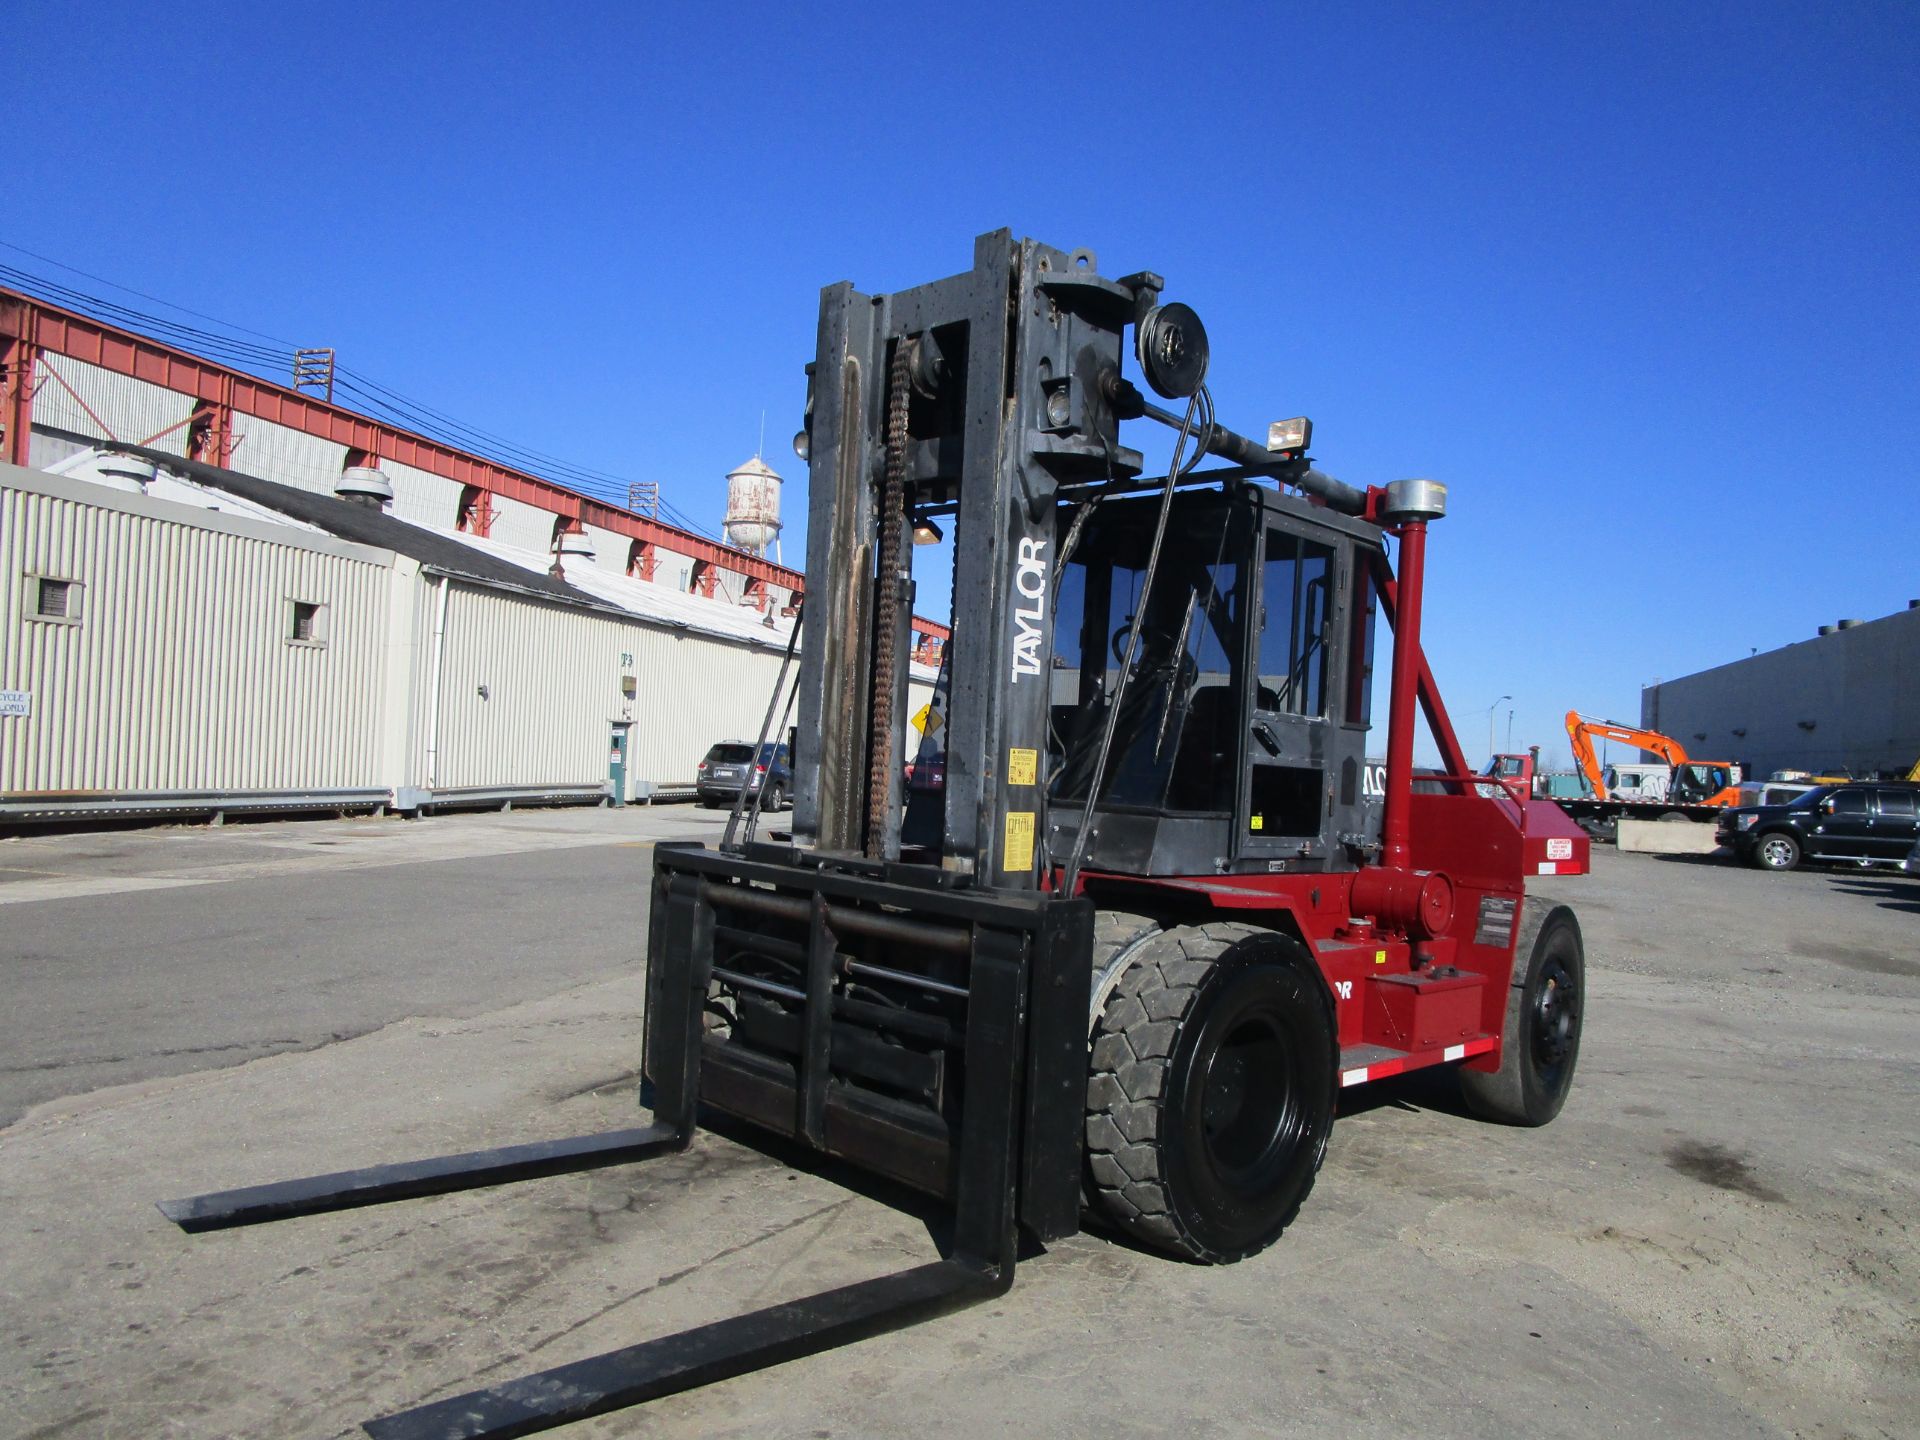 Taylor THD-300S 30,000lb Forklift - Image 19 of 20